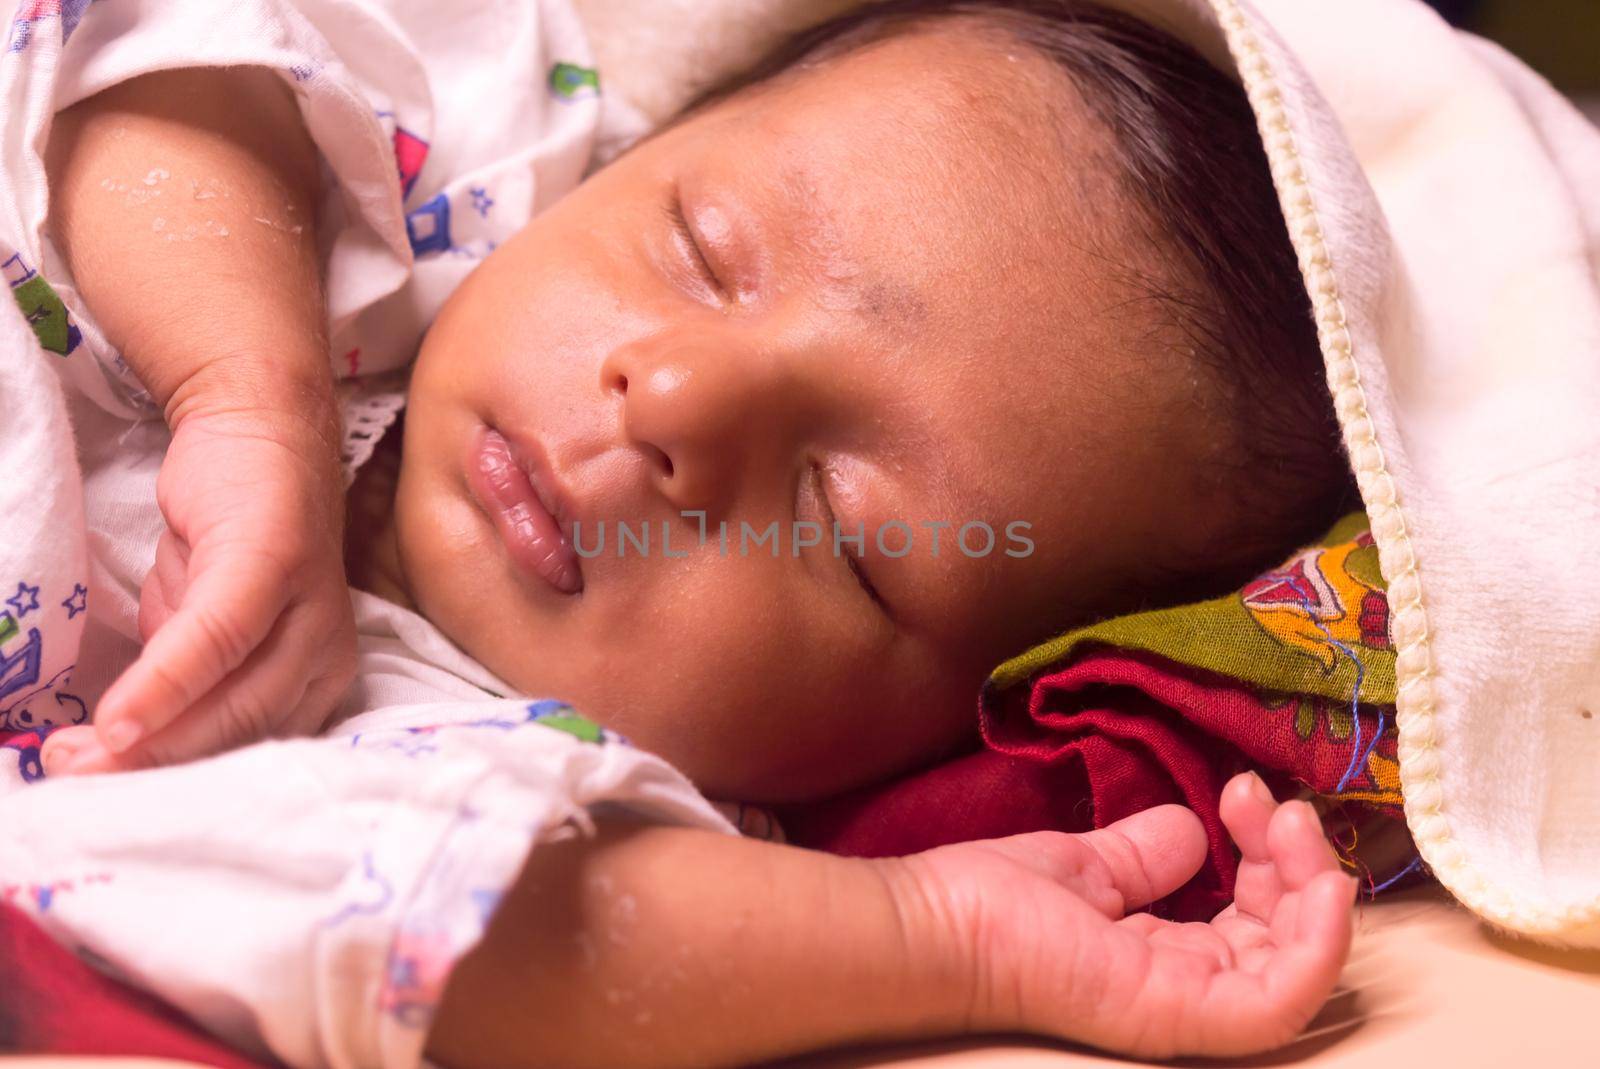 Close up face of cute sleeping newborn baby boy in drowsy eyes with sleepy mood. One month old Sweet infant toddler Closeup portrait. Indian ethnicity. Front view. Child care peace tranquil background by sudiptabhowmick